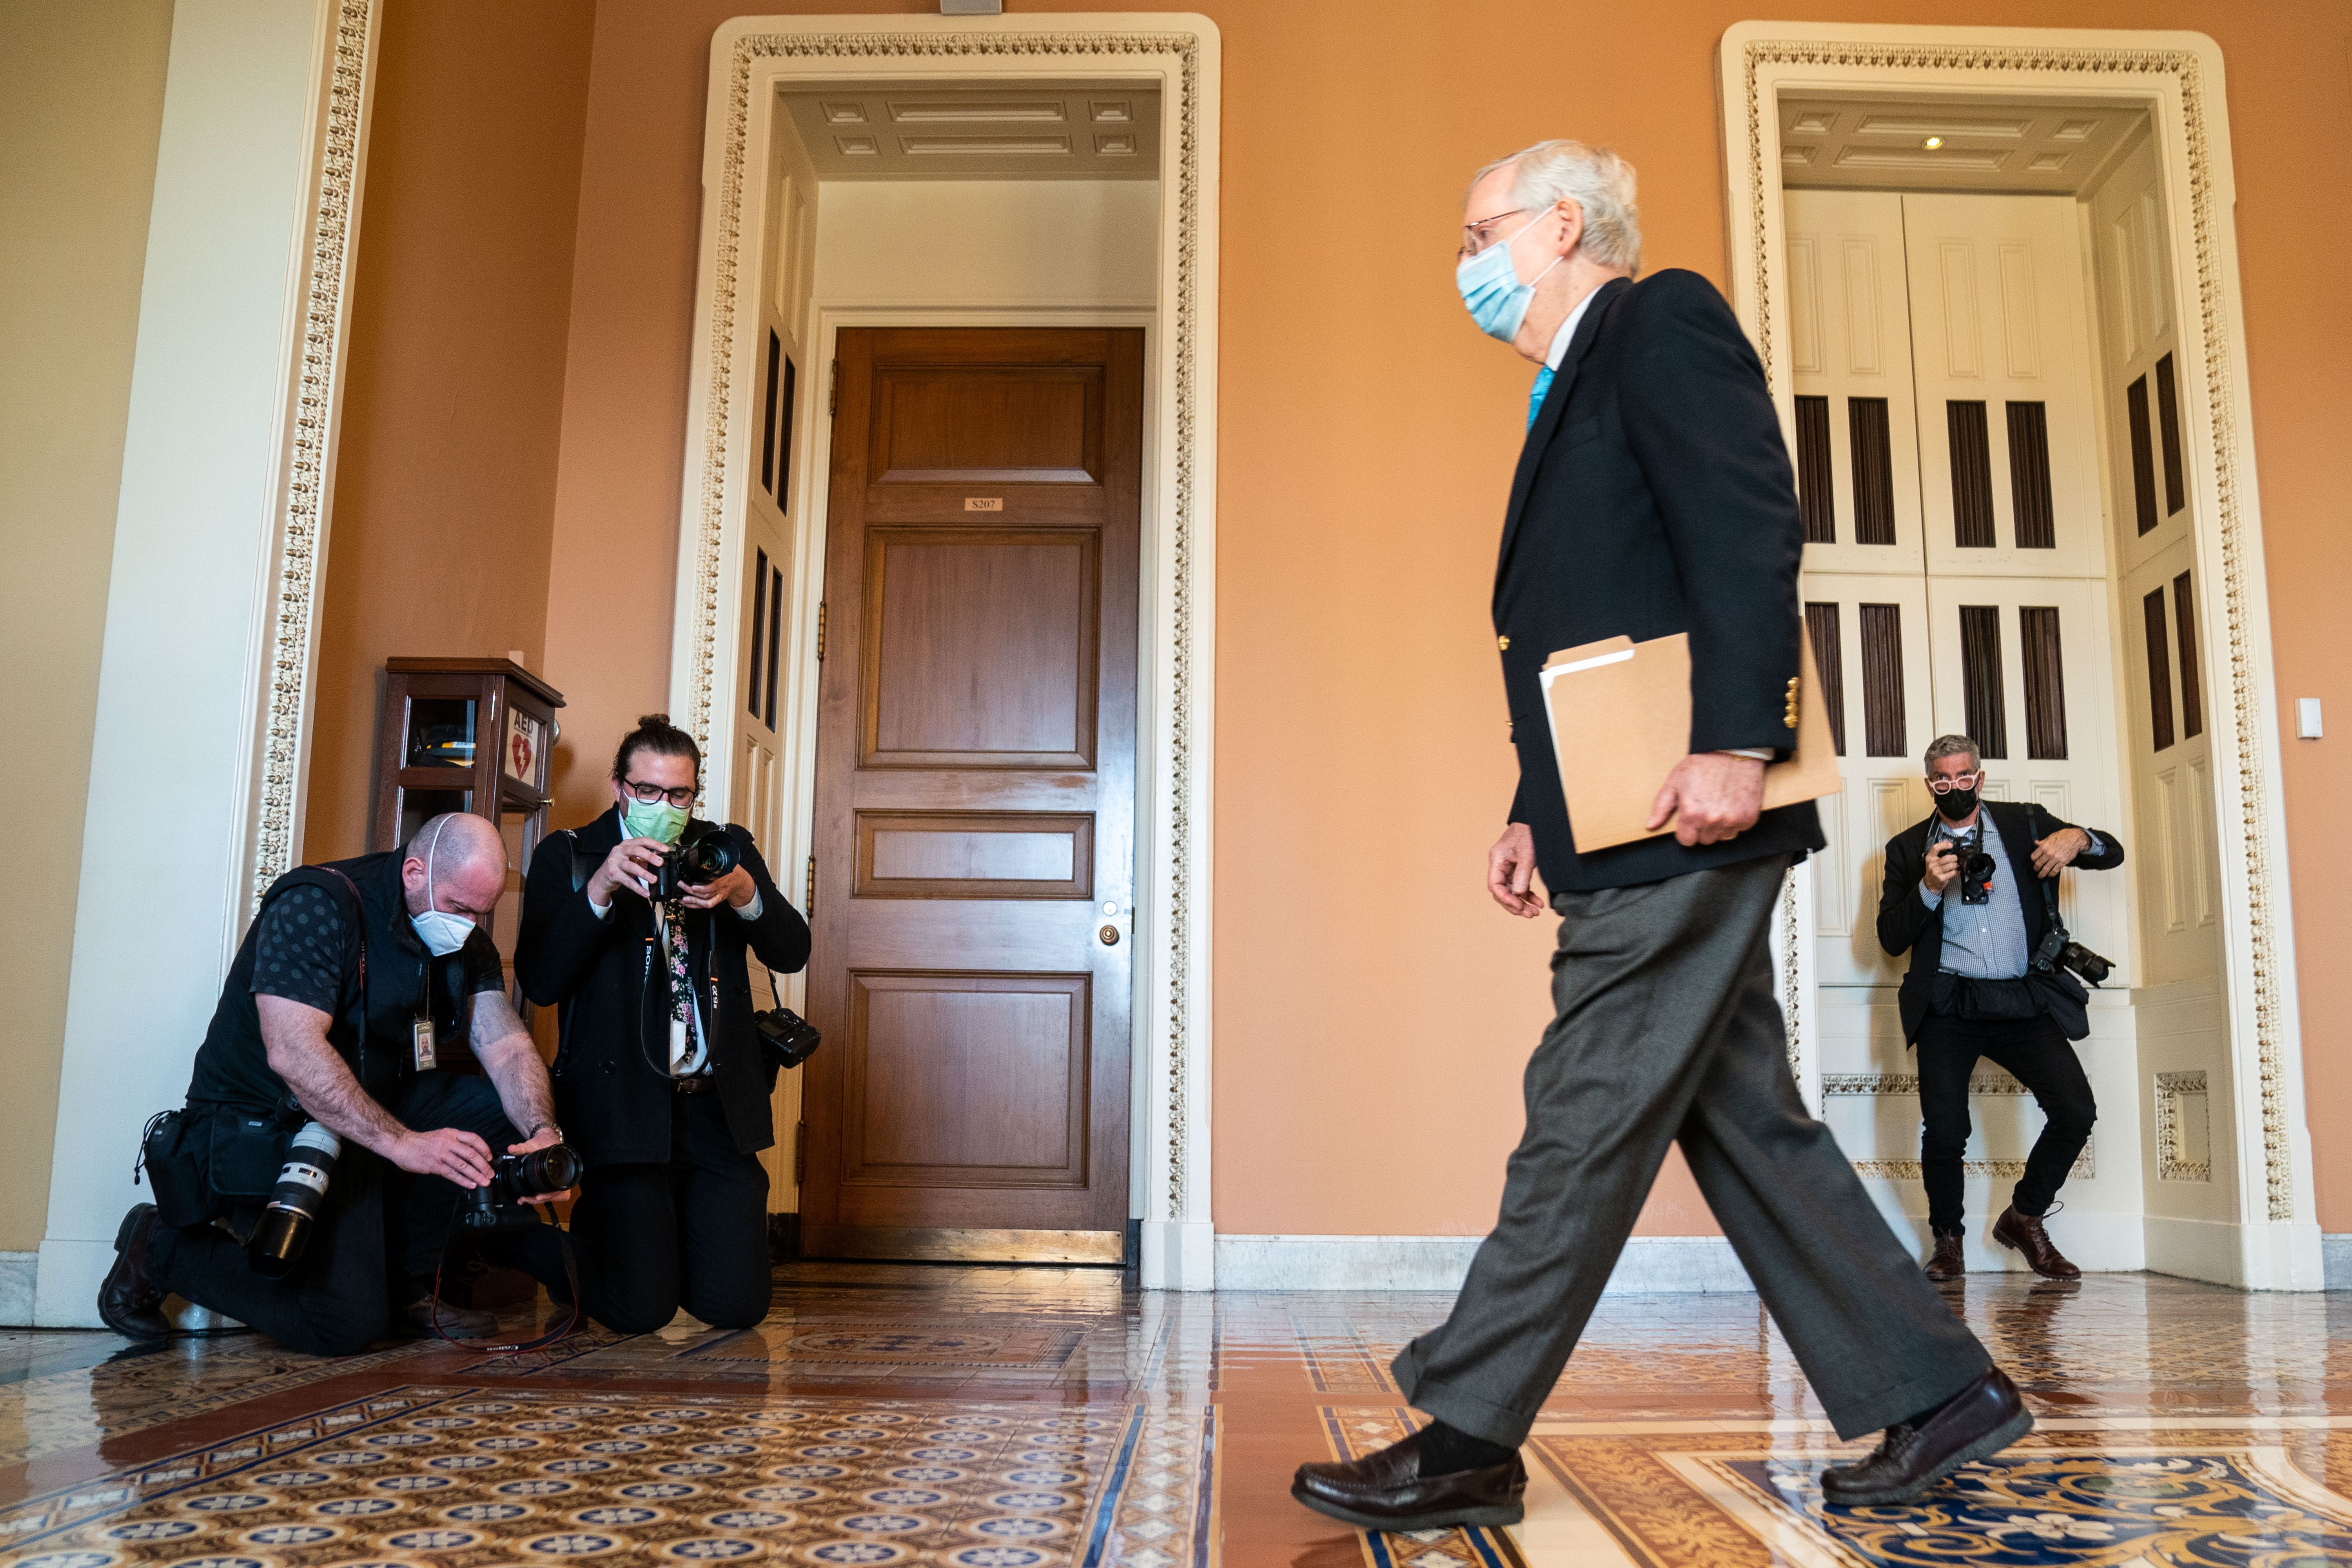 Senate Minority Leader Mitch McConnell is seen walking through the Capitol halls on Monday.